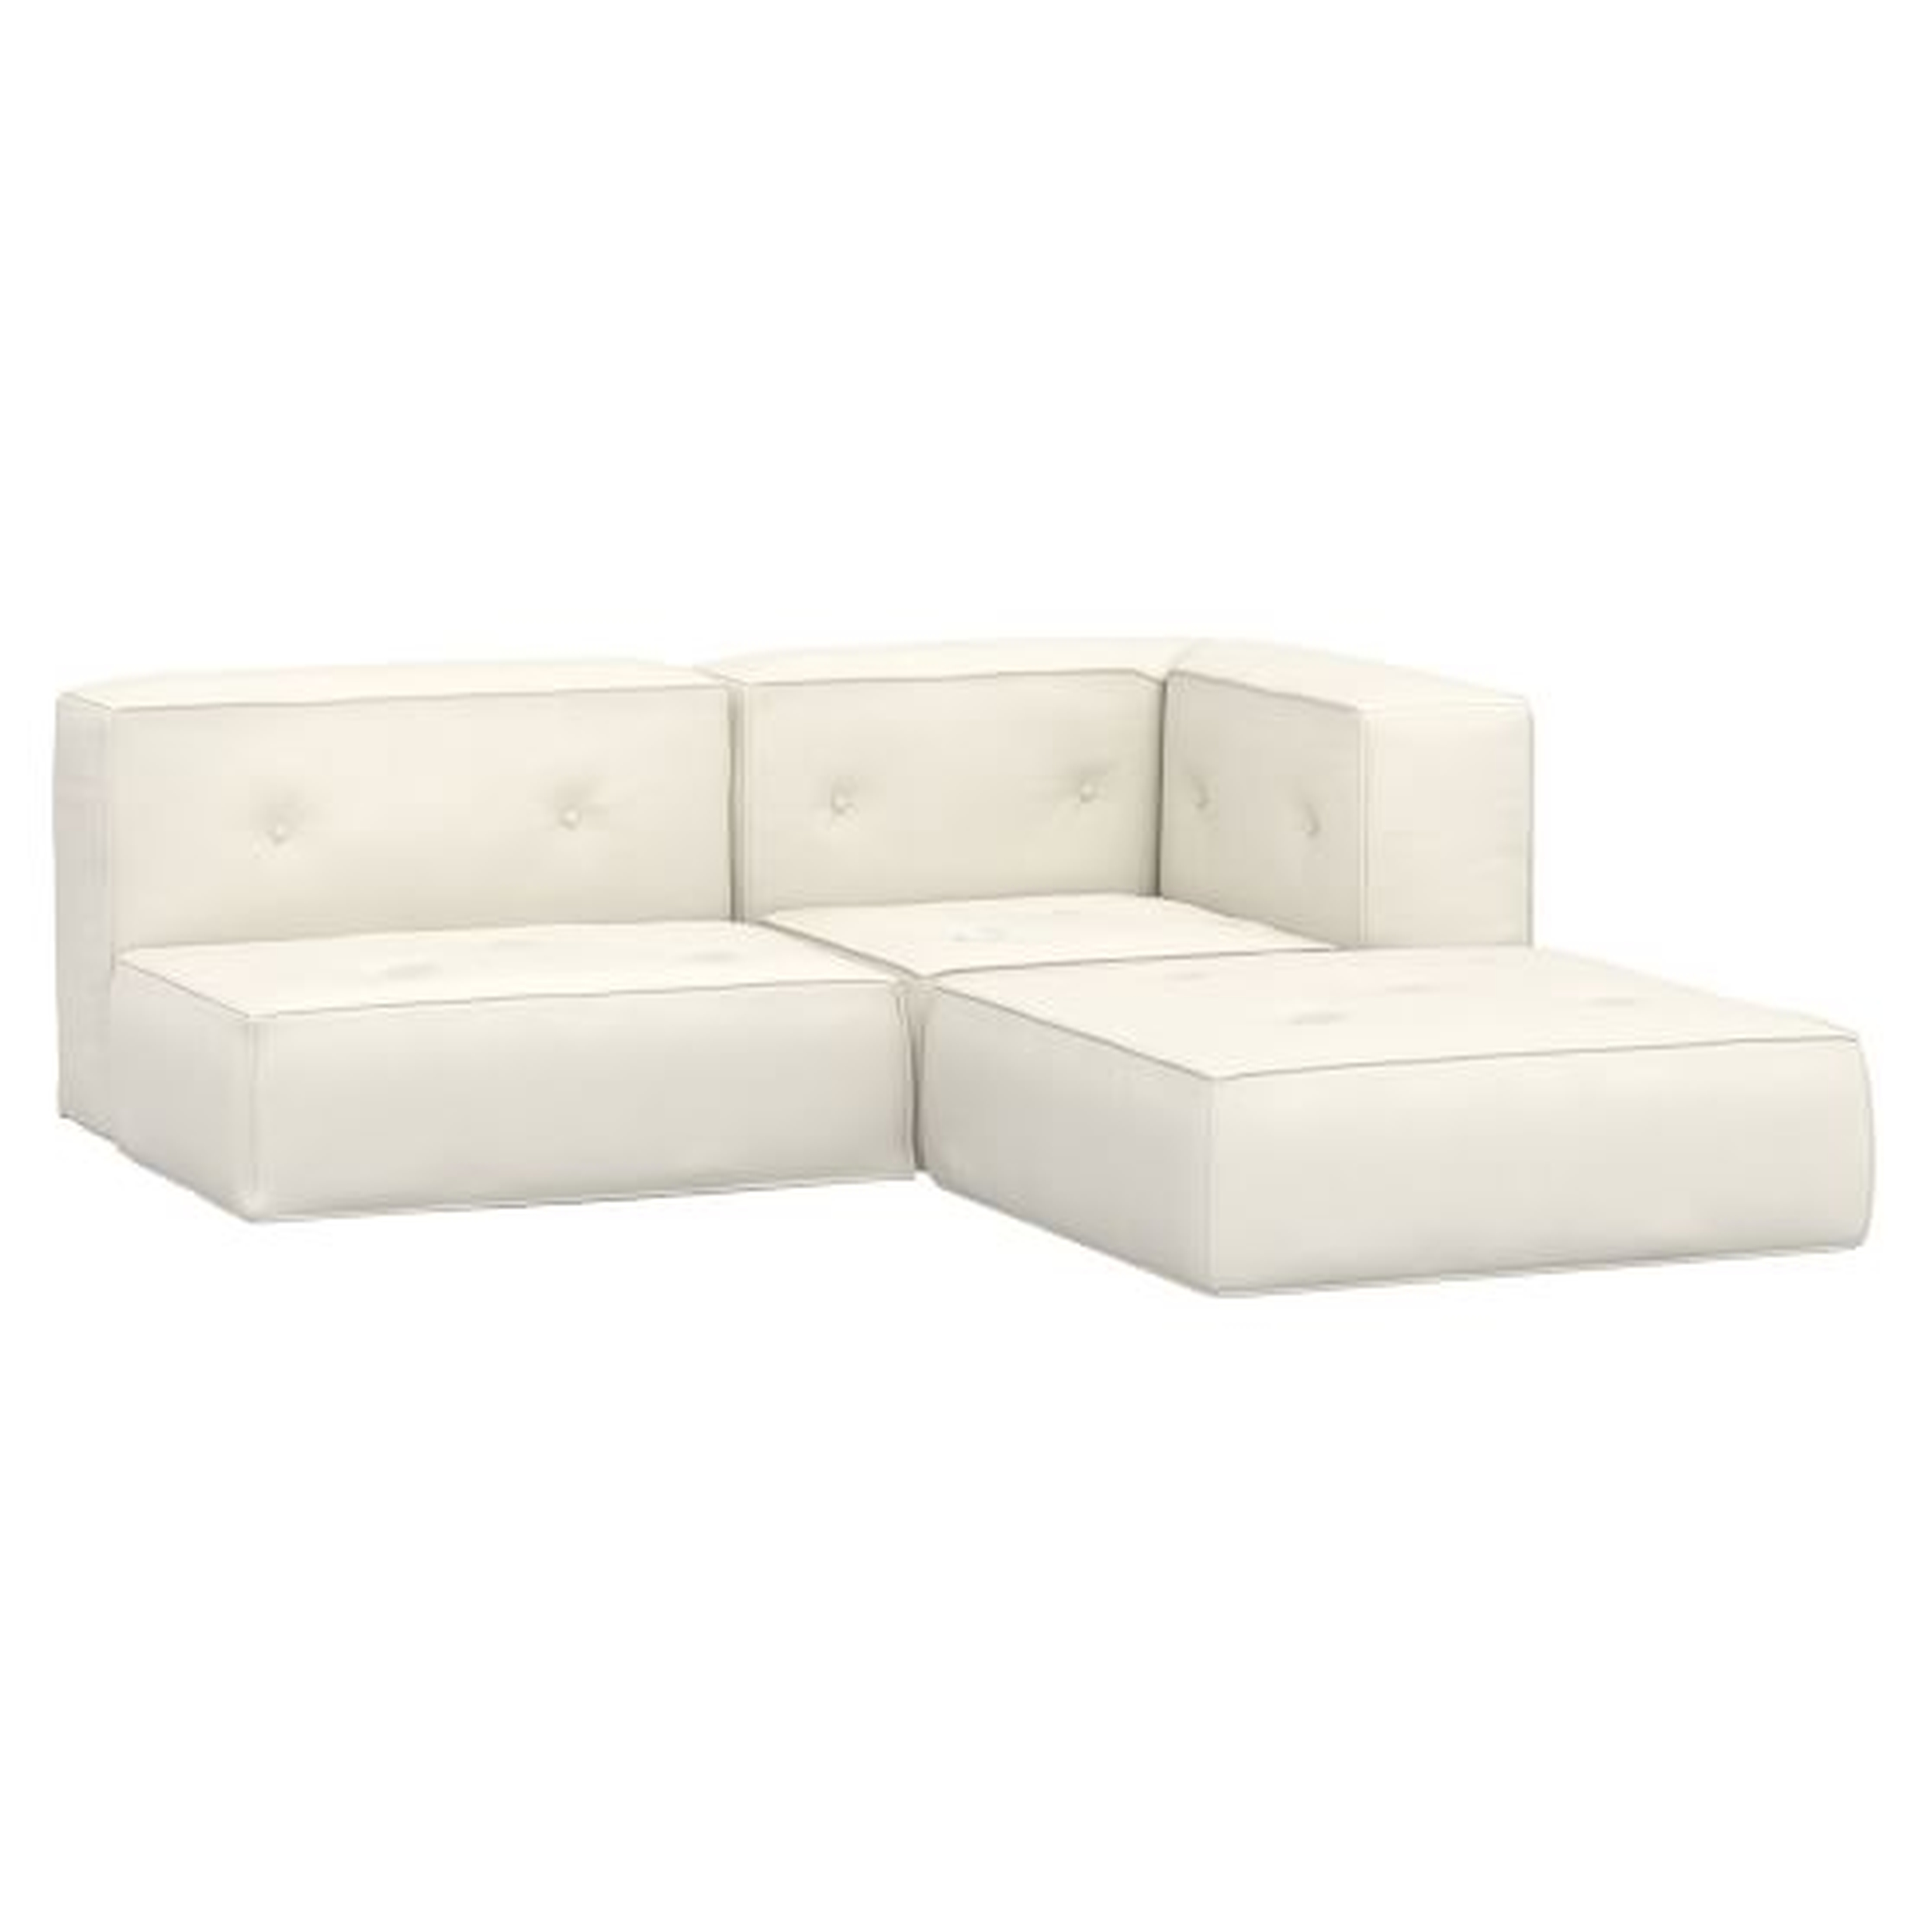 Cushy Piped Trim Sectional Set, Recycled Blend Chenille Washed Ivory, QS In-home - Pottery Barn Teen